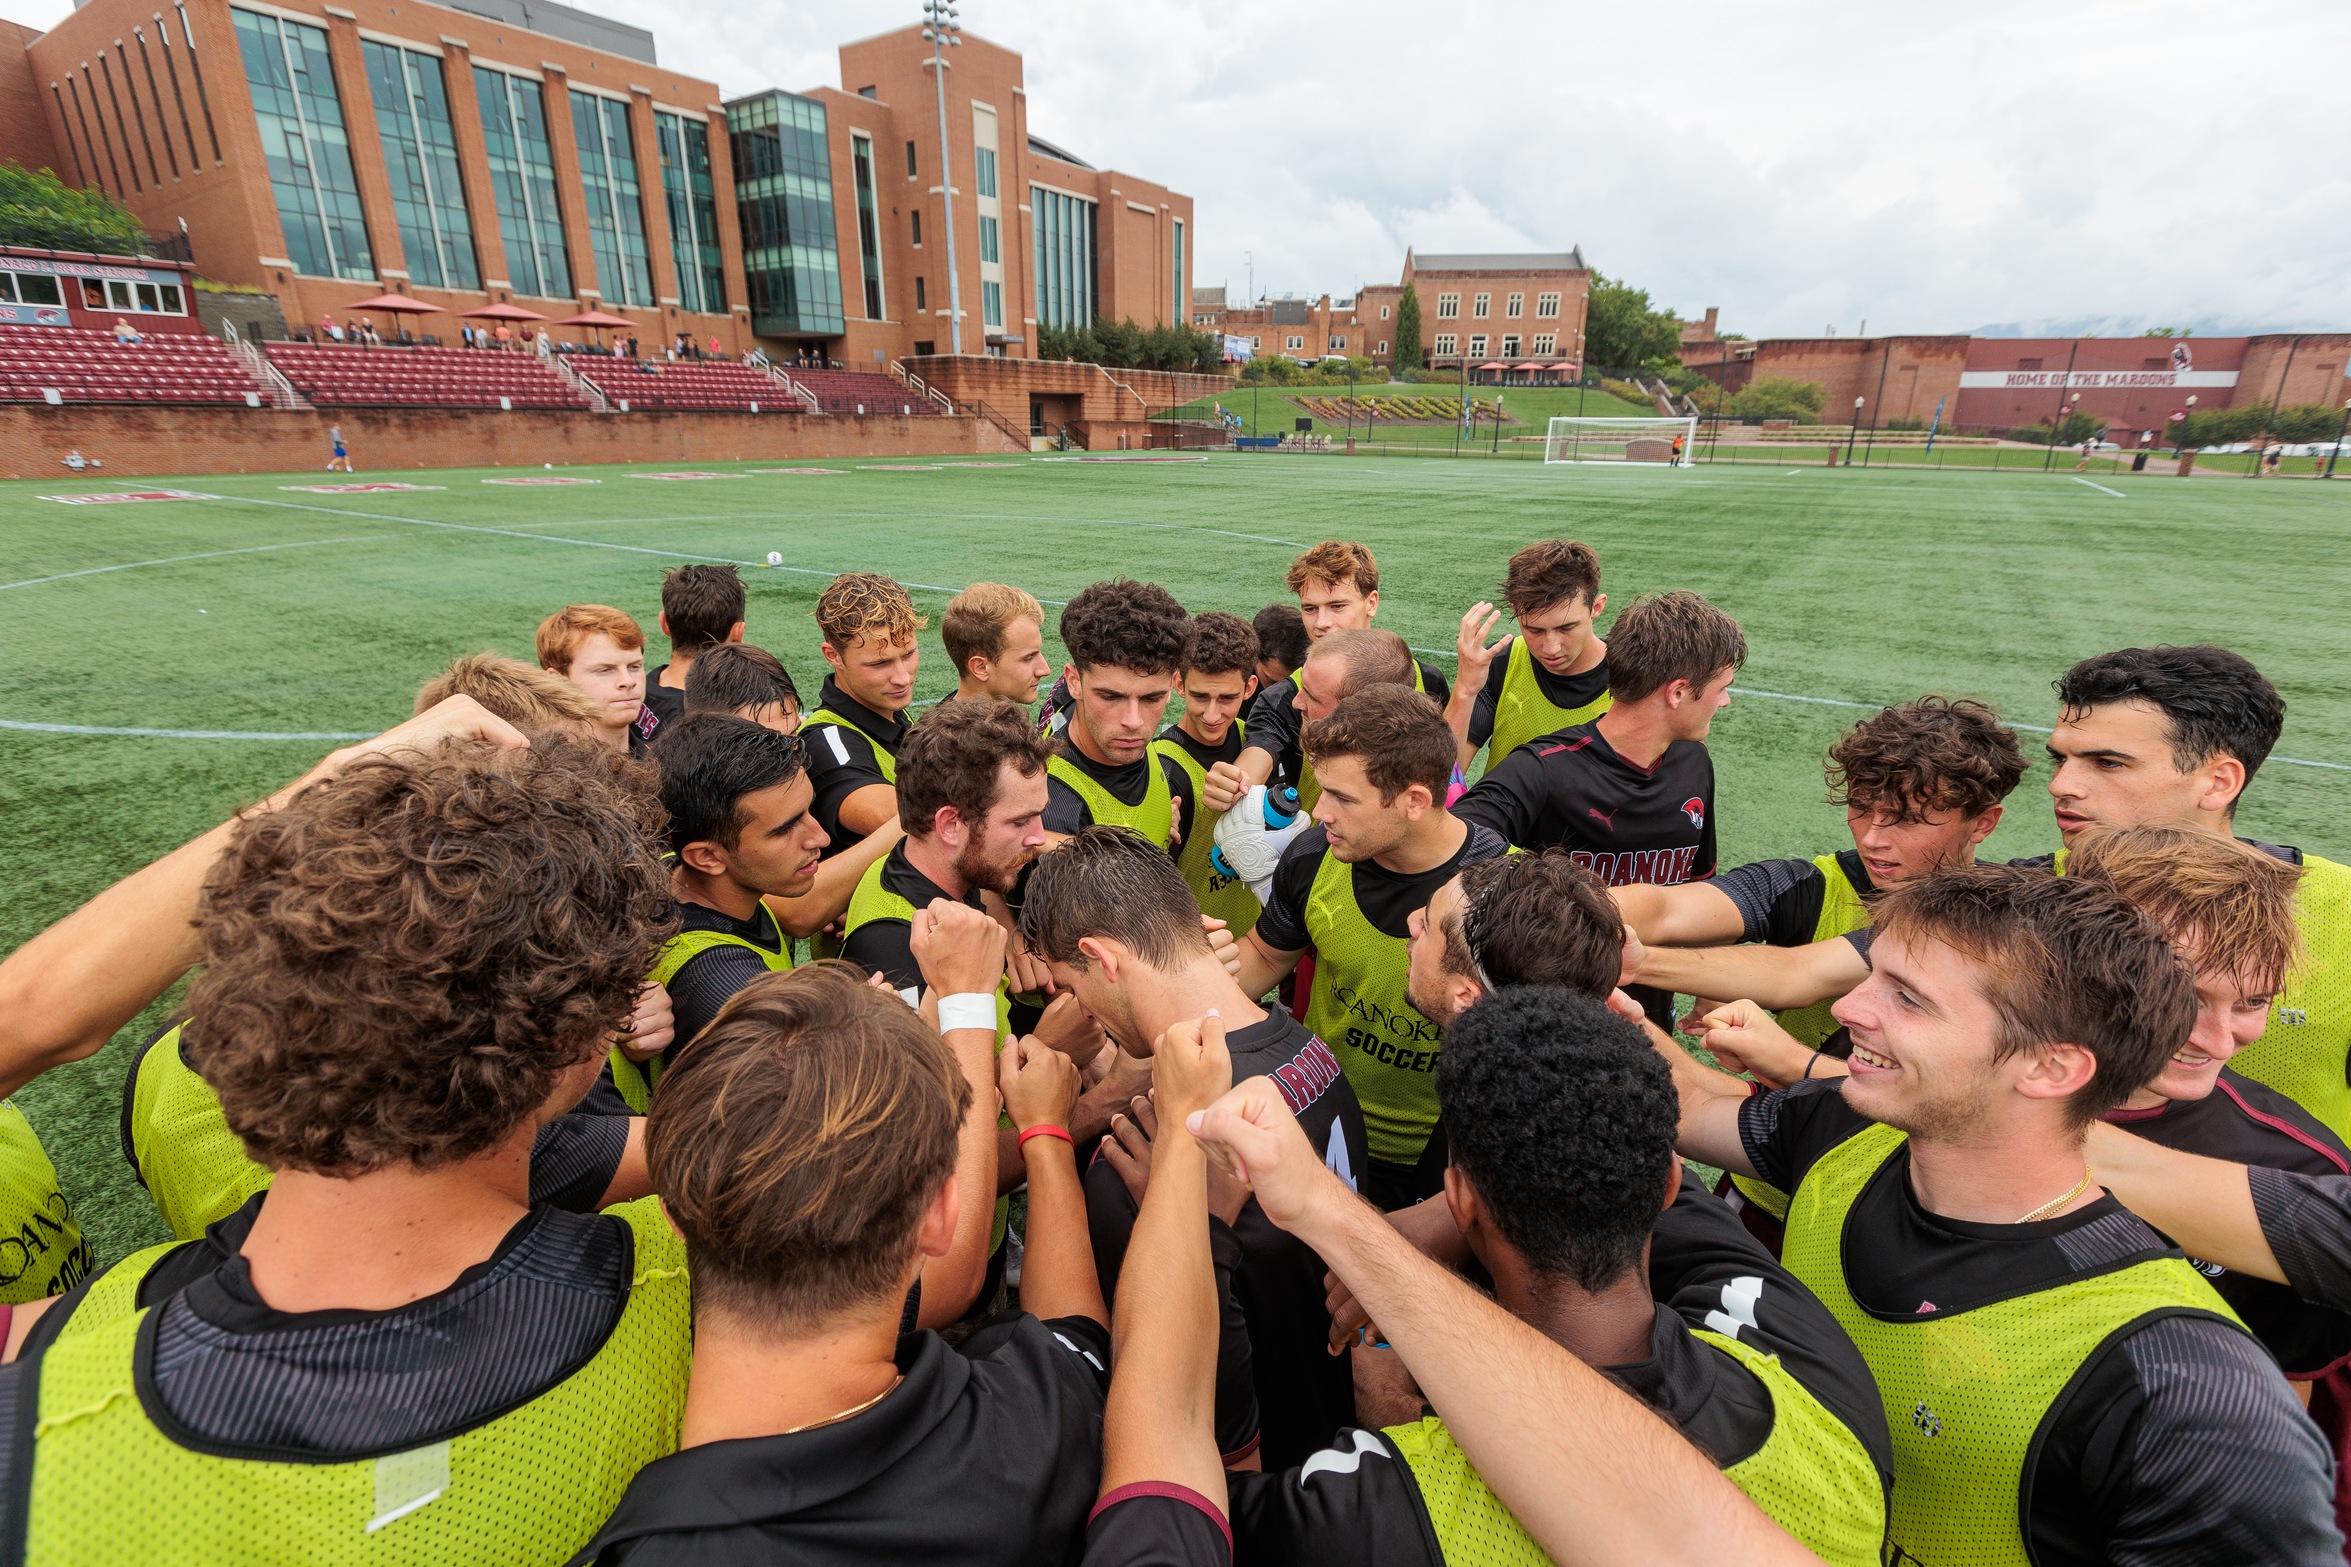 Maroons Secure Home ODAC Tournament Game With 3-0 Win at EMU